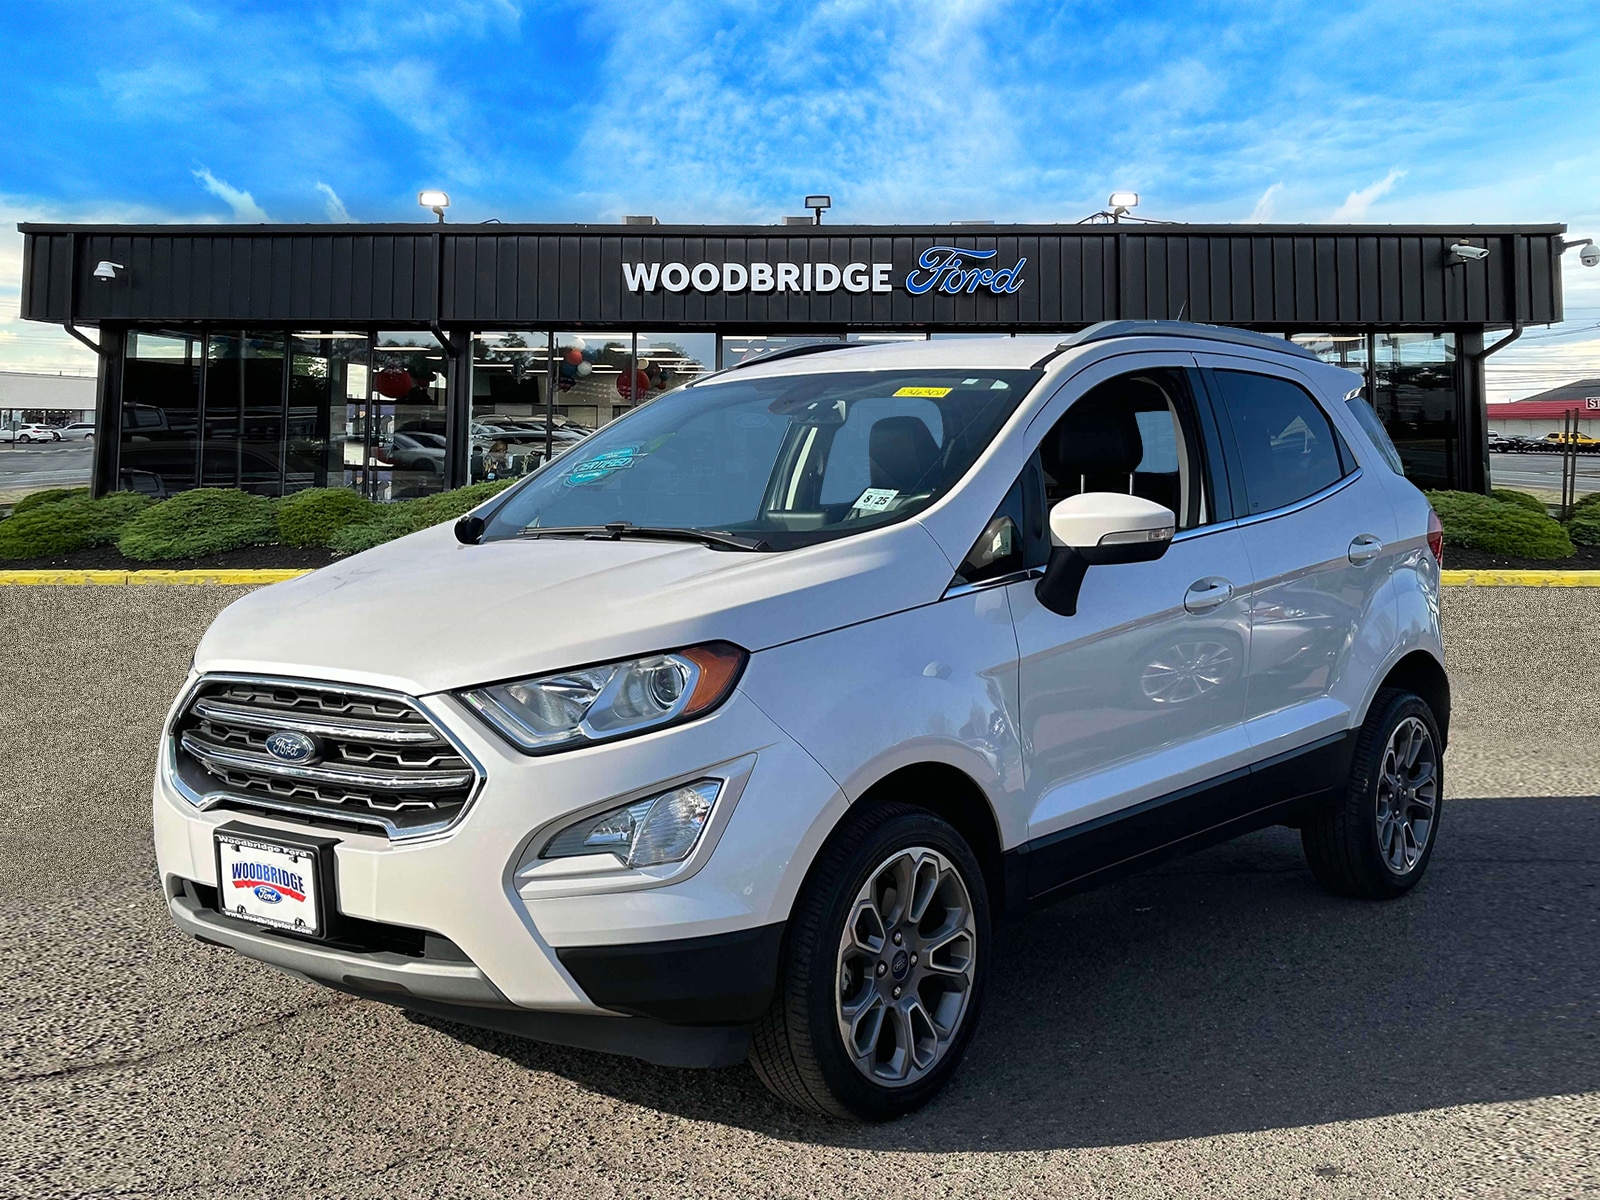 Used 2020 Ford Ecosport Titanium with VIN MAJ6S3KL5LC336930 for sale in Woodbridge, NJ